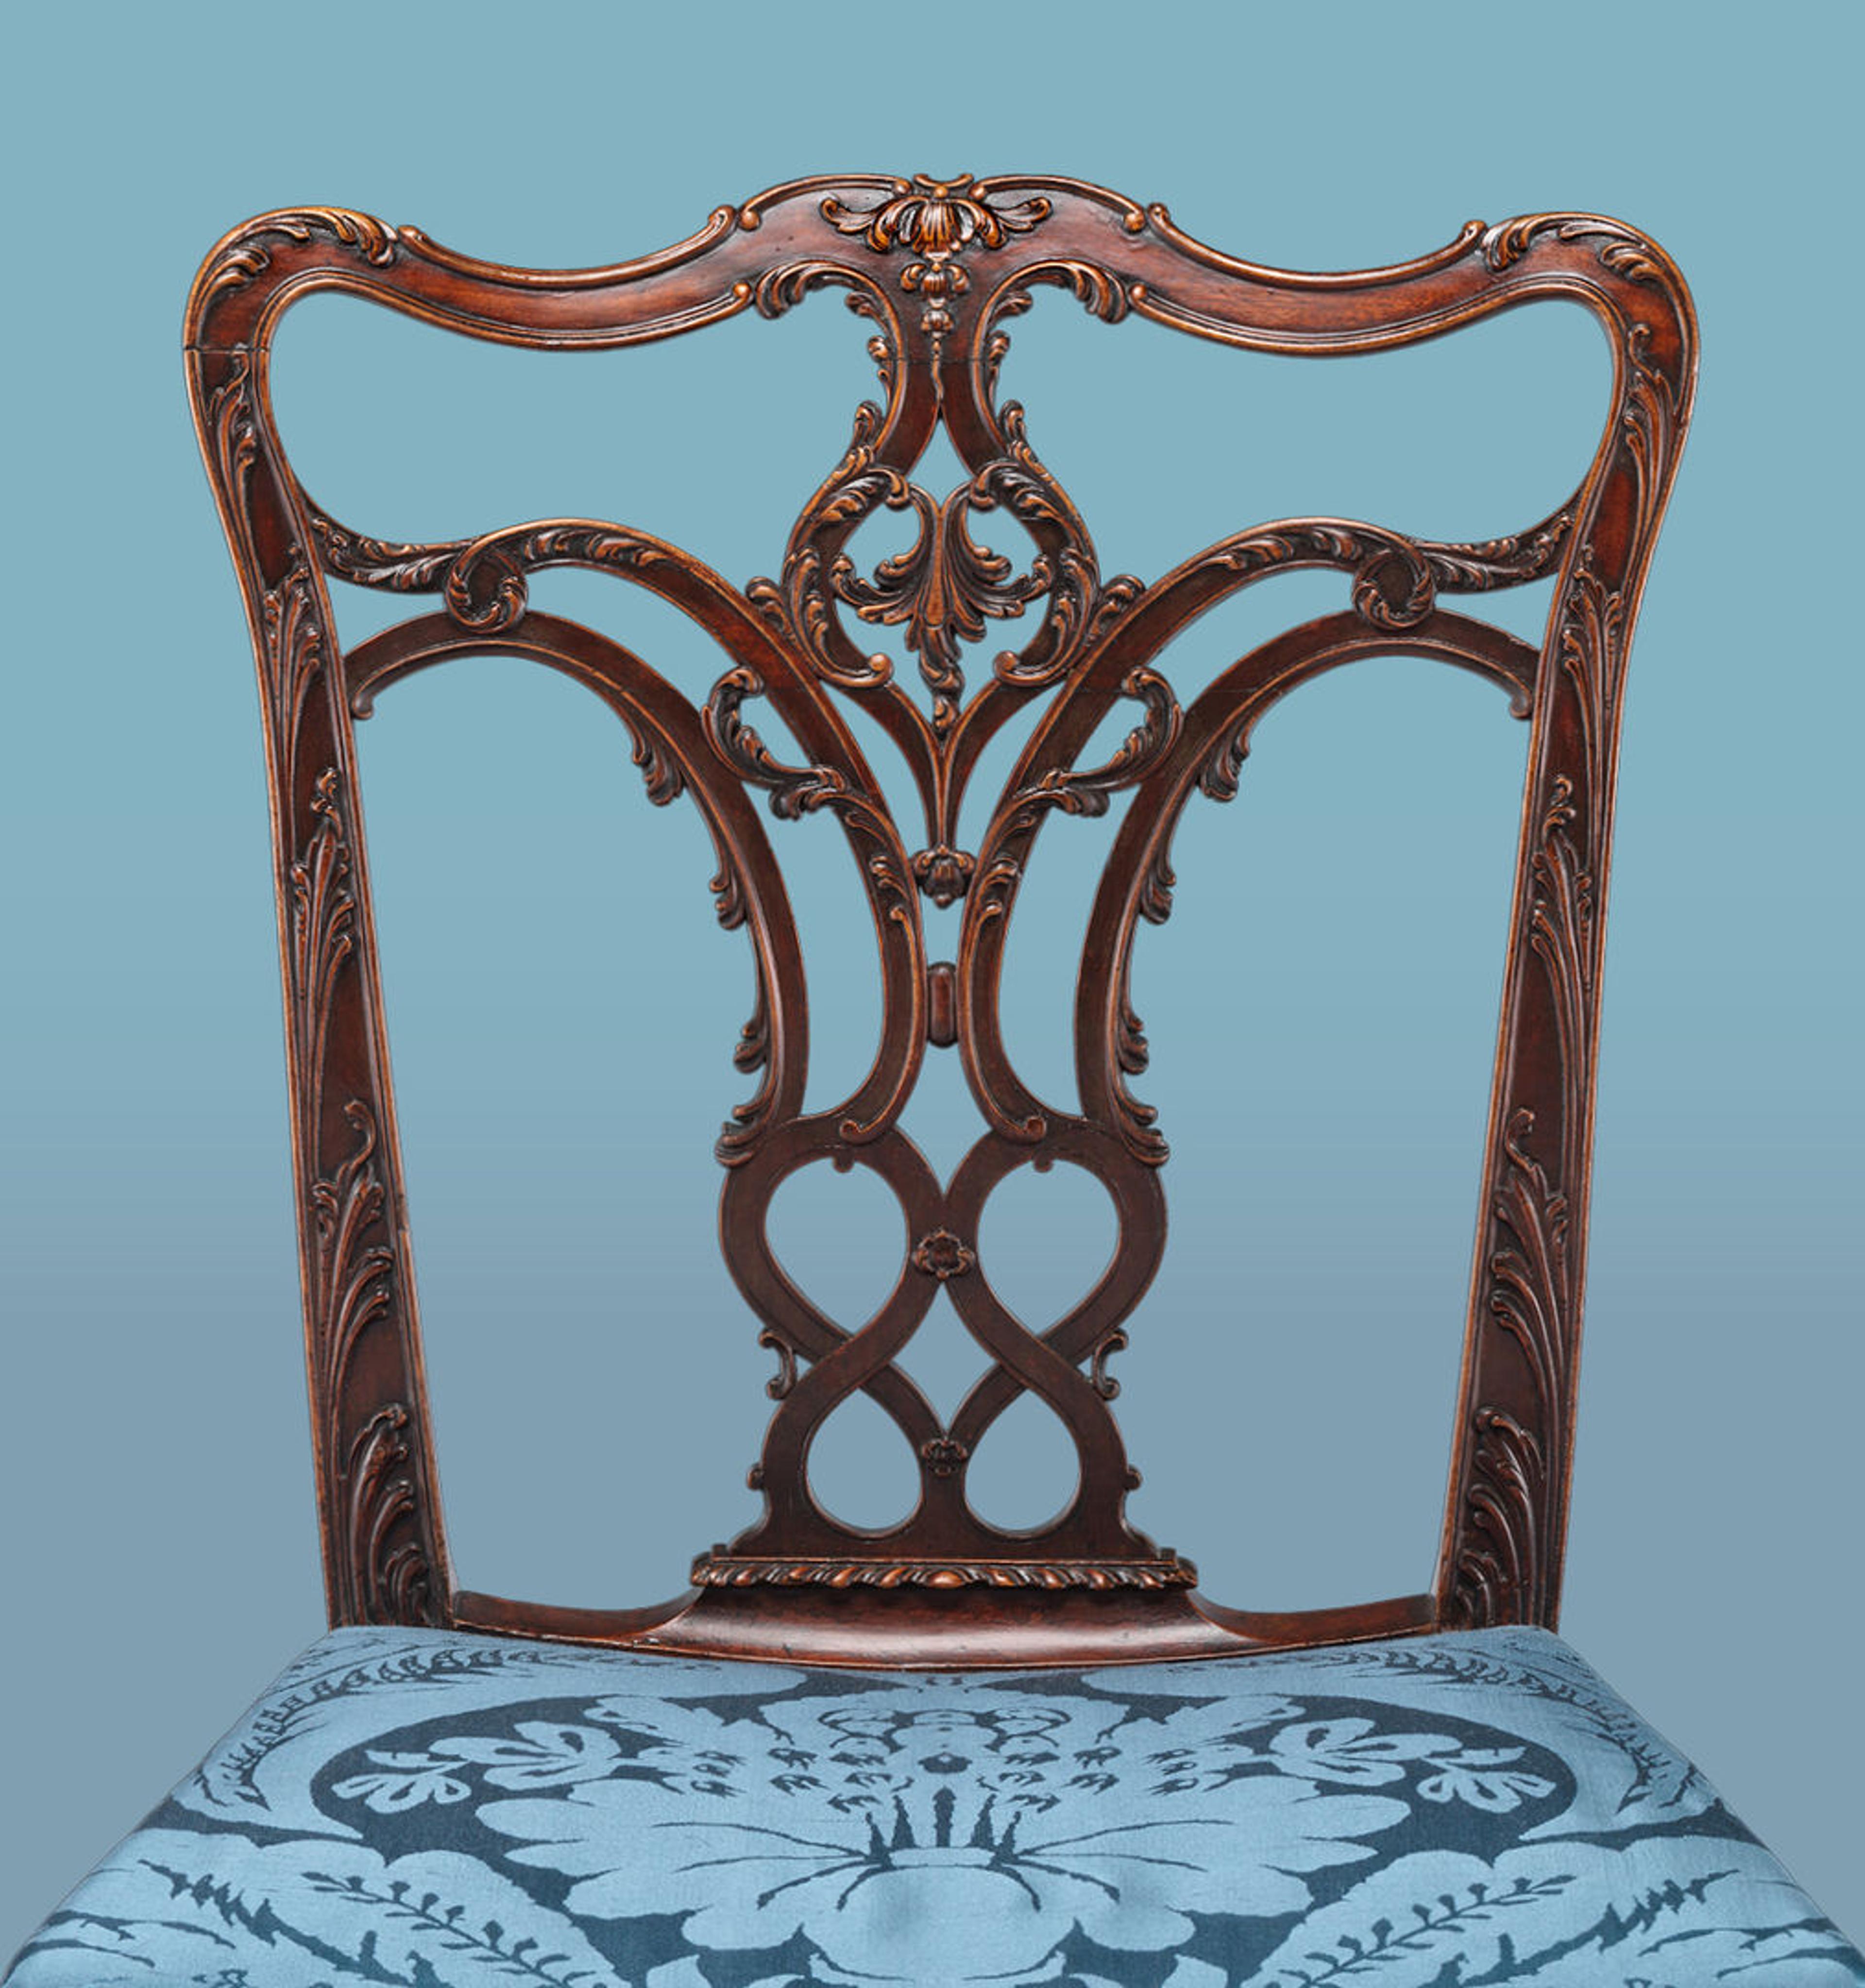 Detail view of a chair inspired by Thomas Chippendale's designs